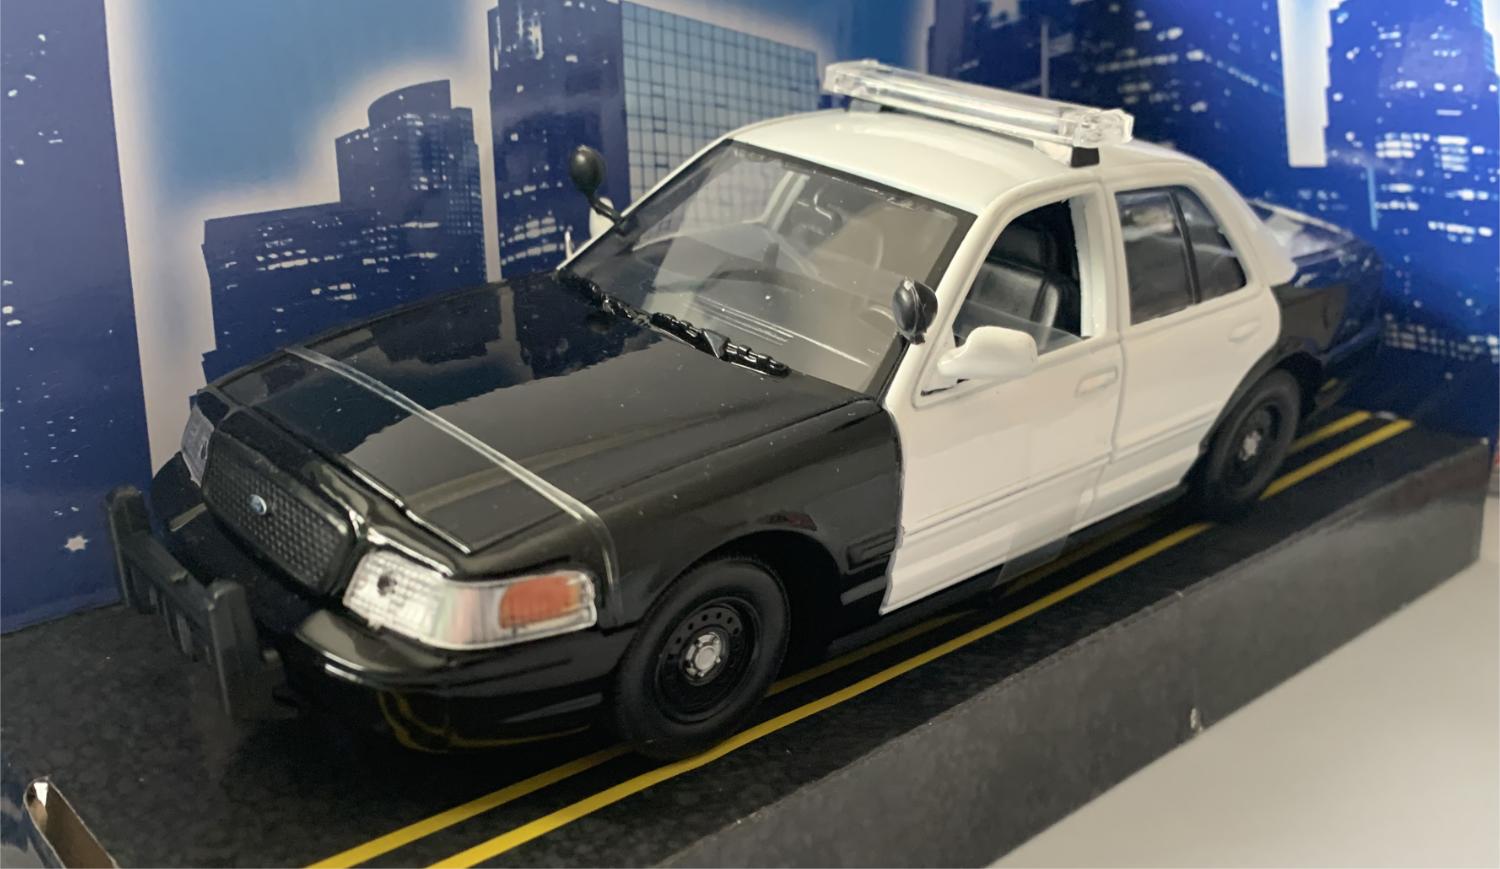 Ford Crown Victoria 2007 Police Interceptor Car in black / white 1:24 scale model from Motormax